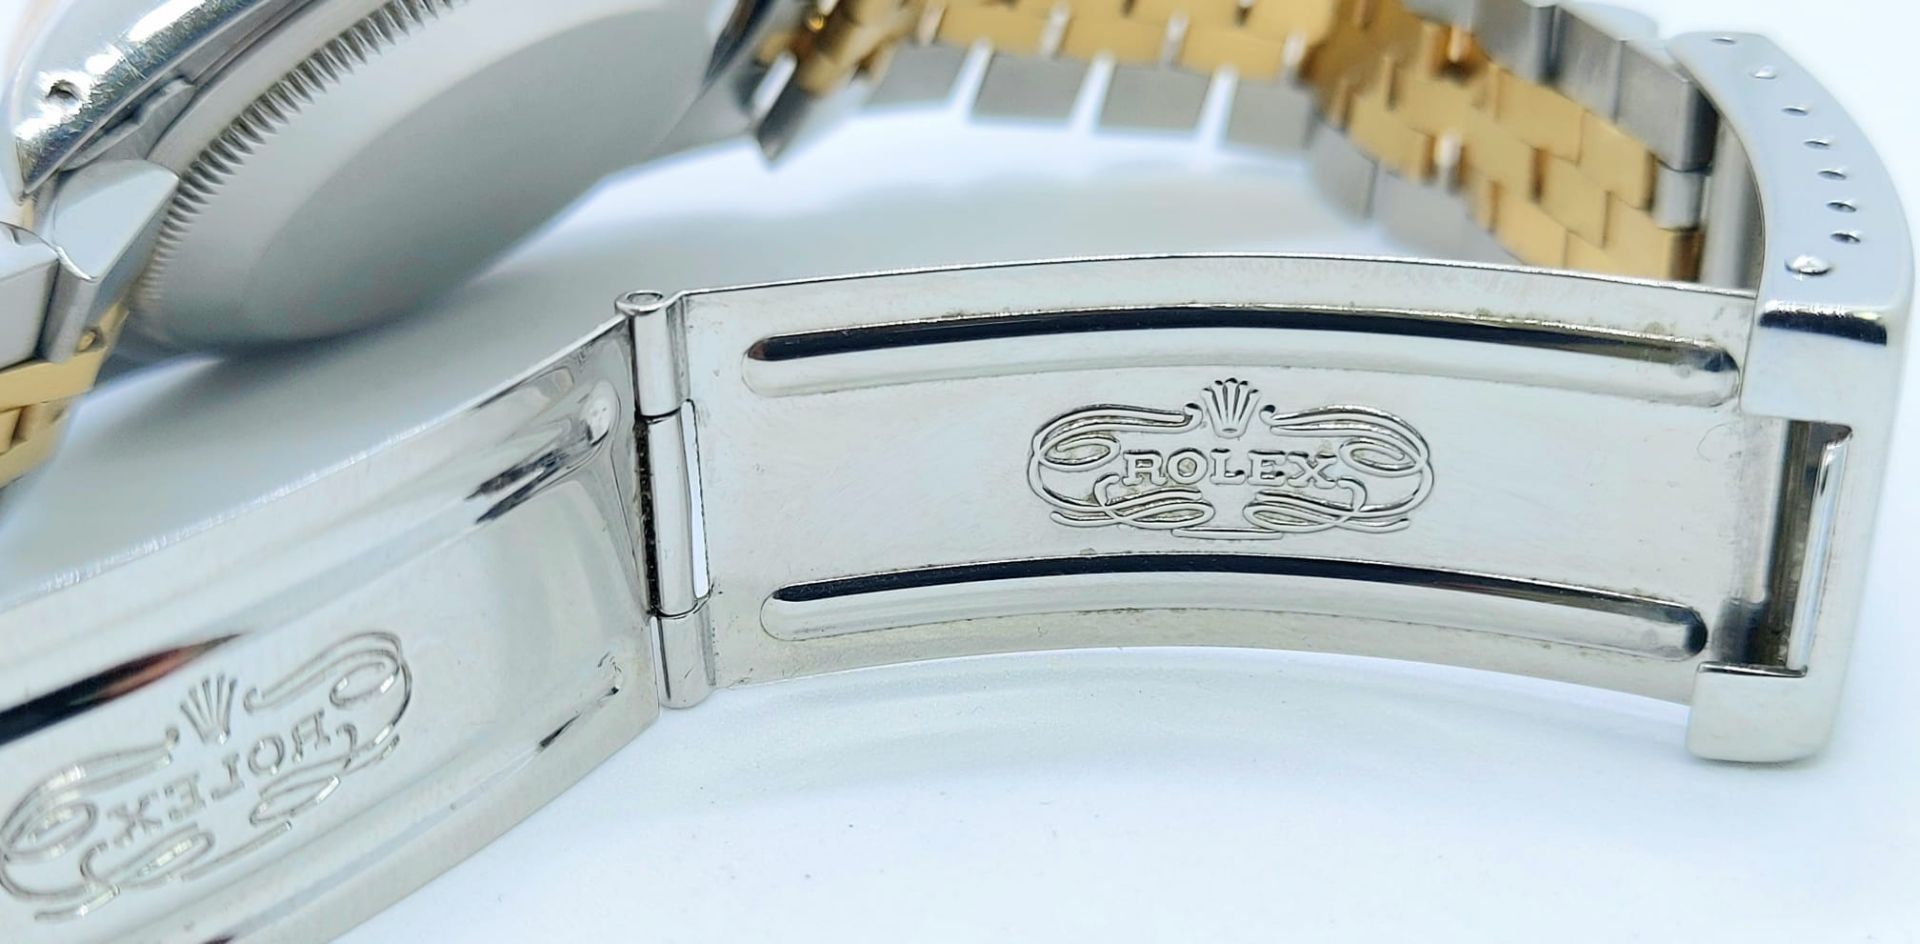 A Bi-Metal Rolex Oyster Perpetual Datejust Gents Diamond Watch. Bi-metal strap and case - 36mm. - Image 7 of 7